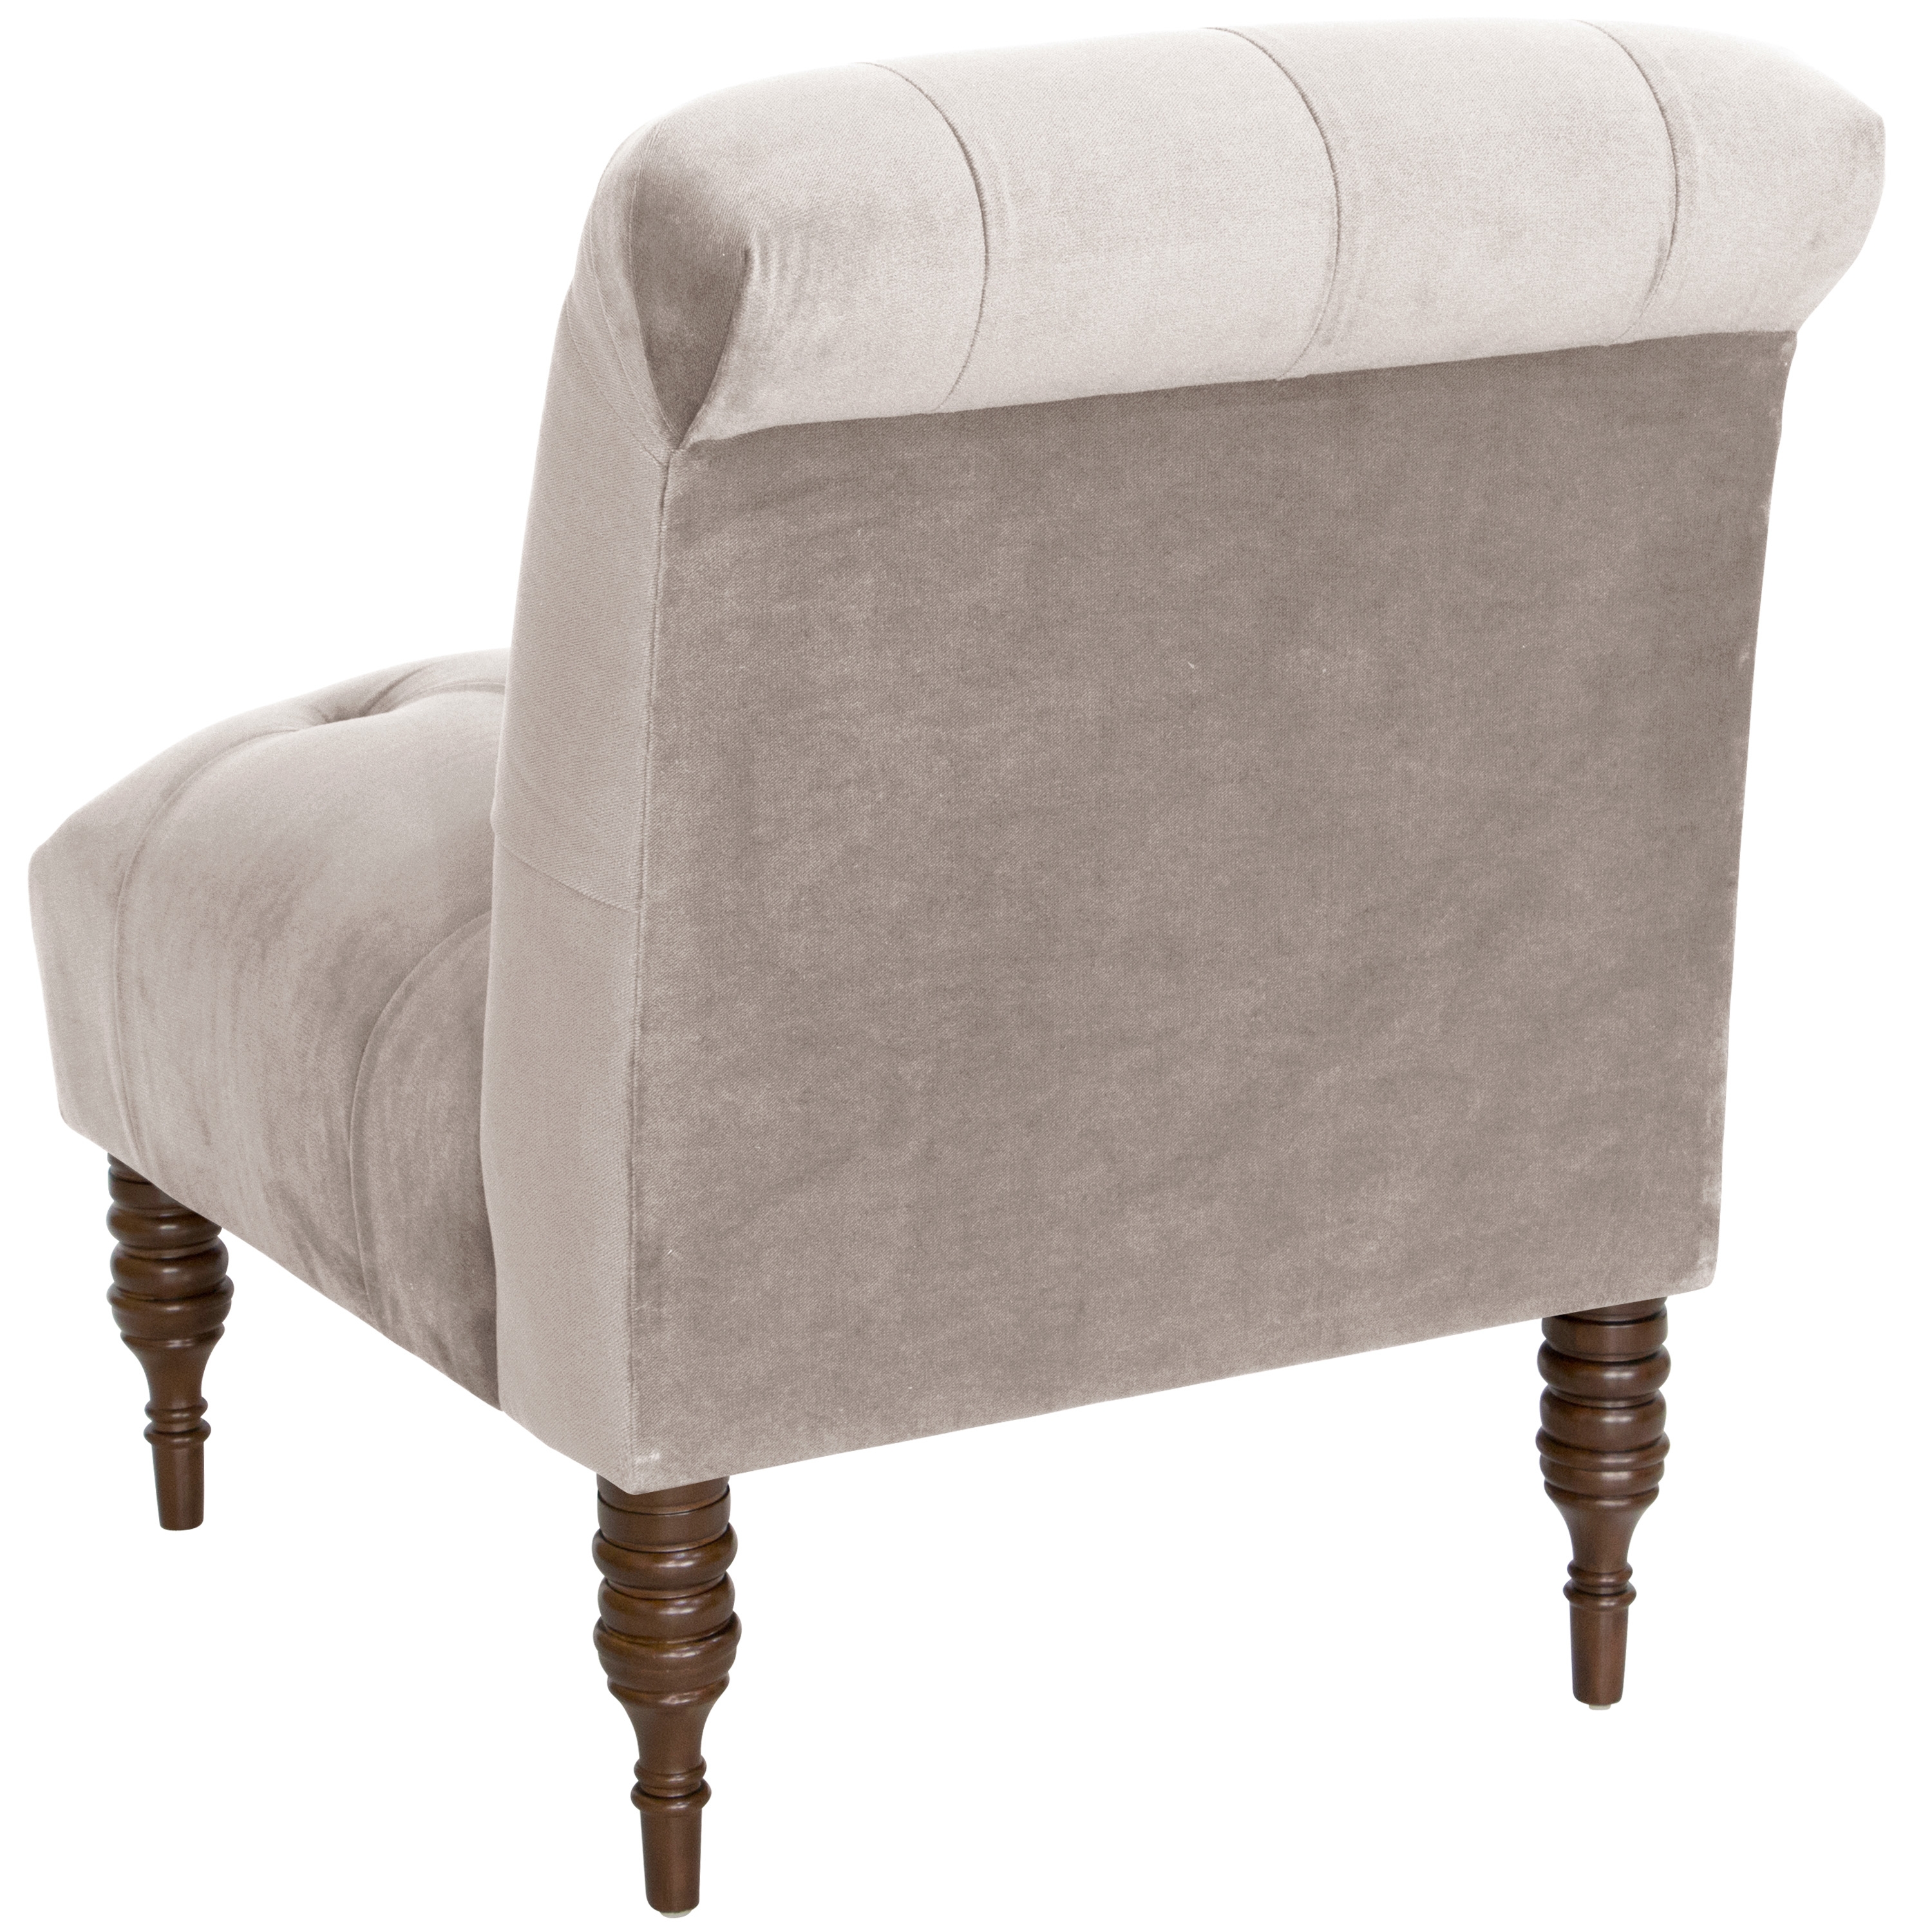 Hyde Park Chair in Mystere Dove - Image 3